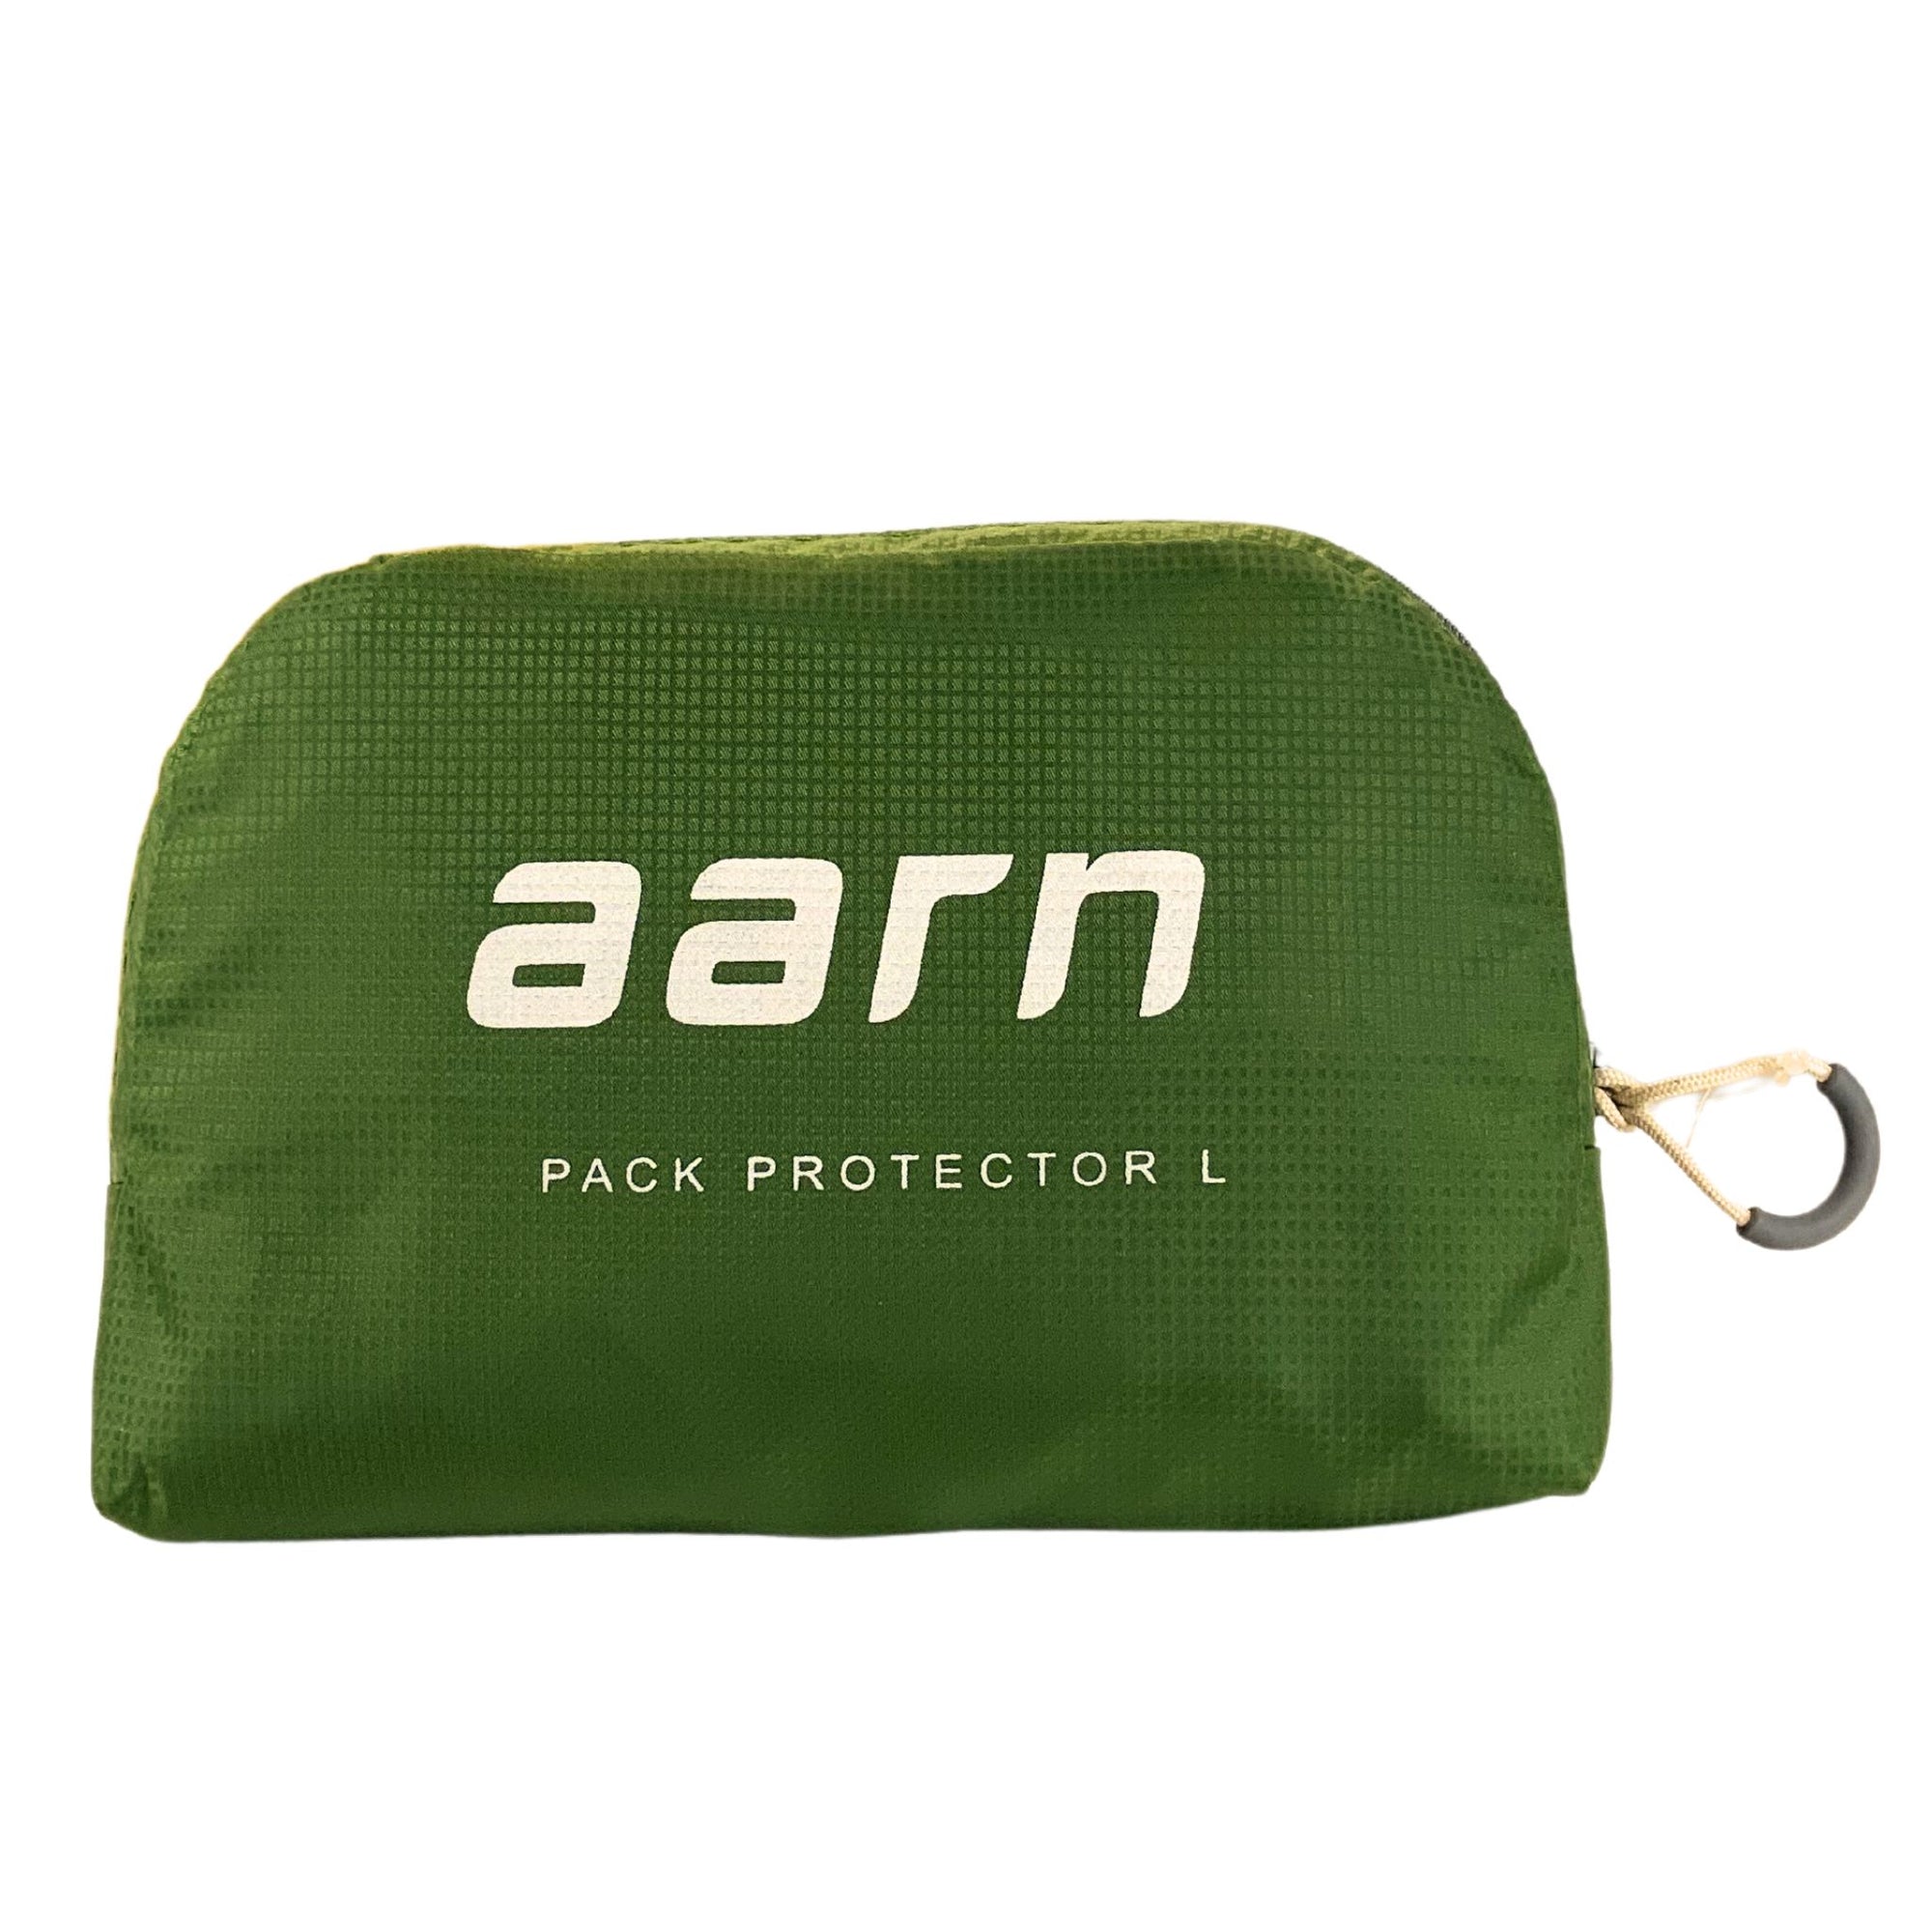 Pack Protector